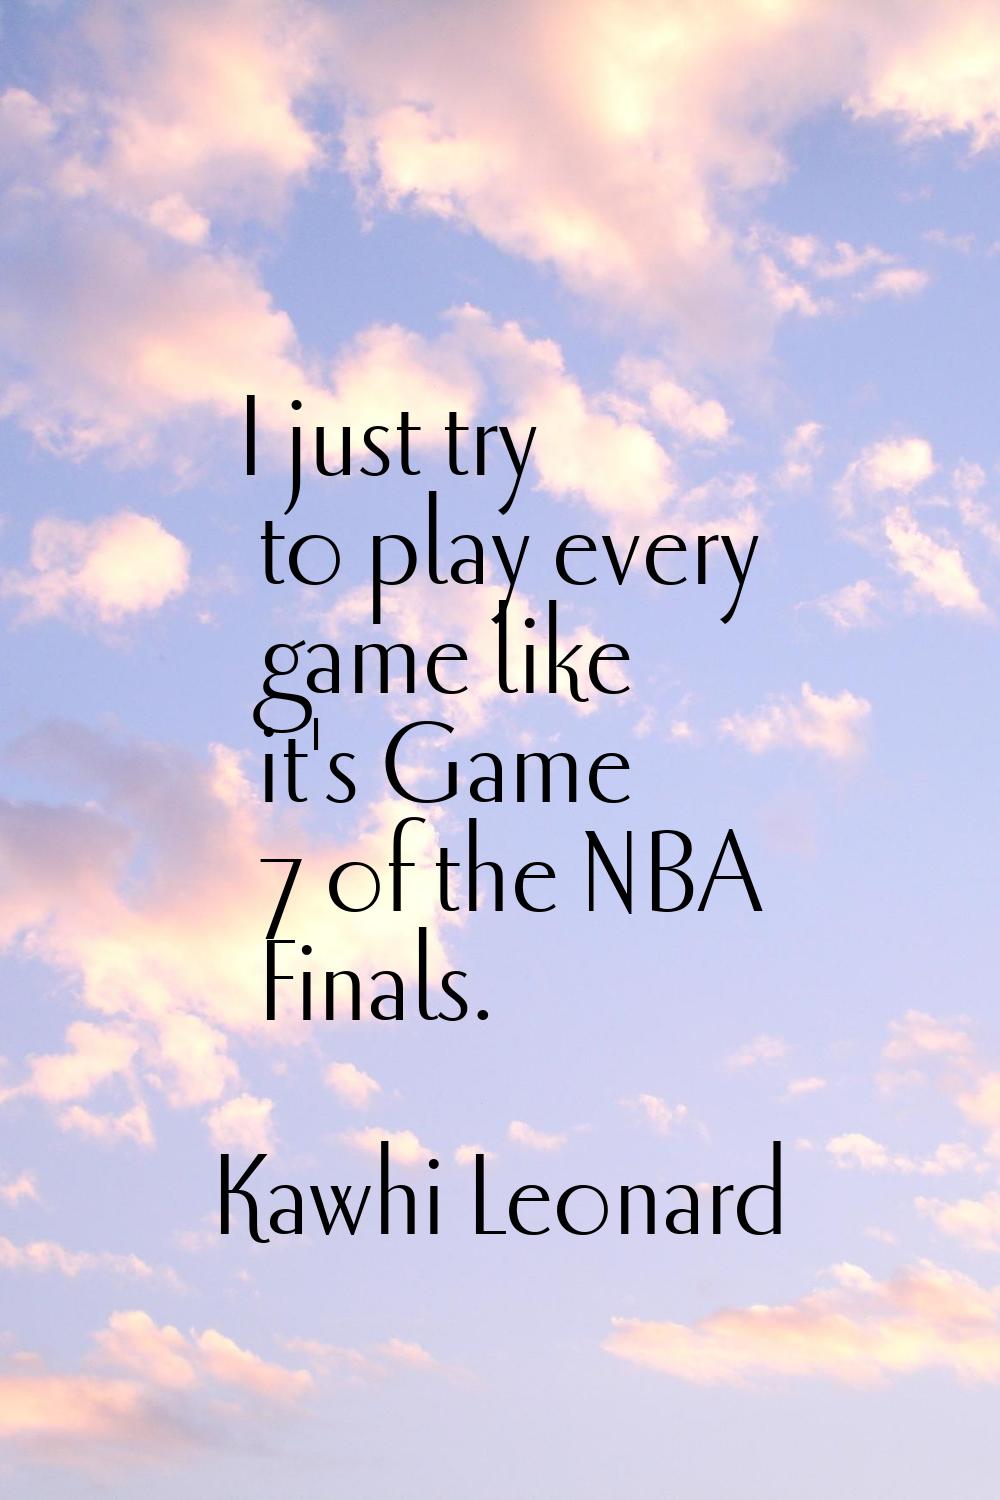 I just try to play every game like it's Game 7 of the NBA Finals.